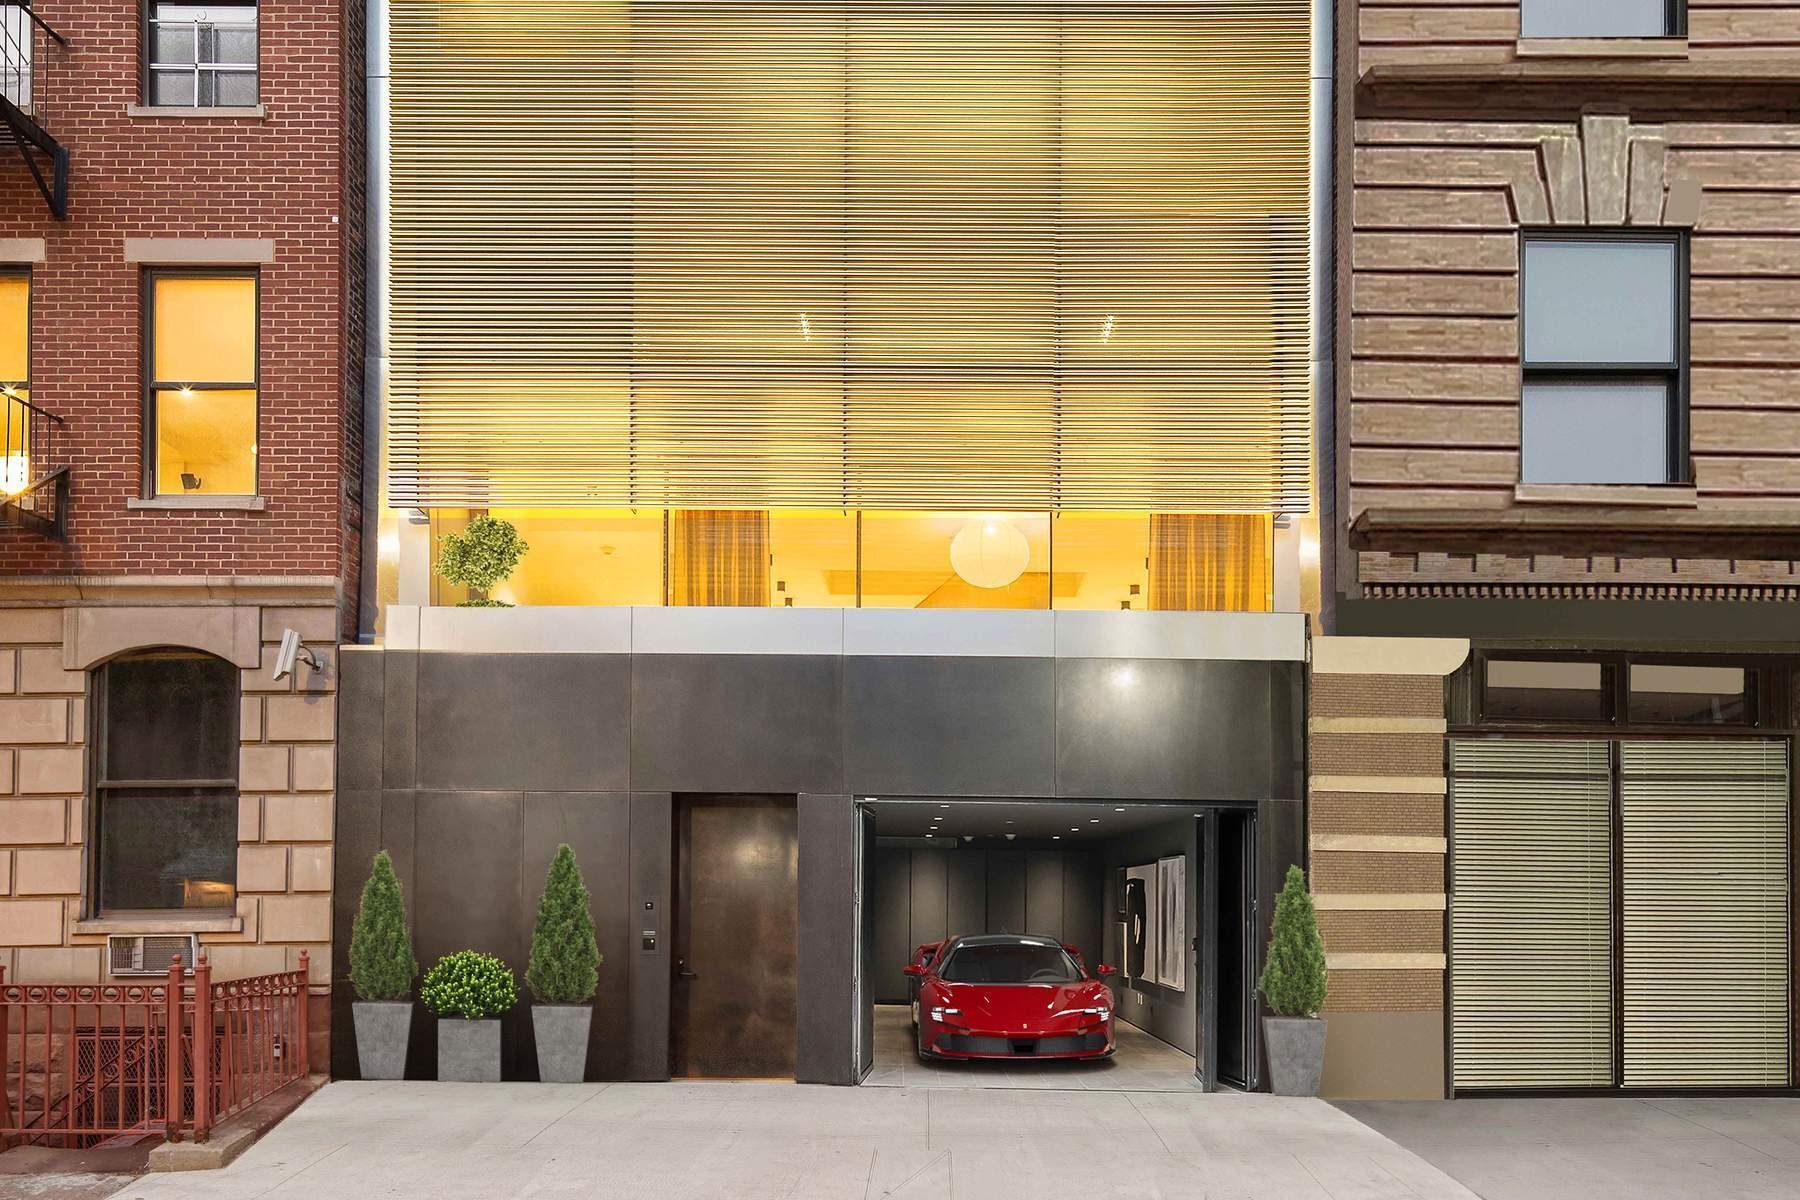 217 West 20th Street, Chelsea, Downtown, NYC - 4 Bedrooms  6.5 Bathrooms  11 Rooms - 